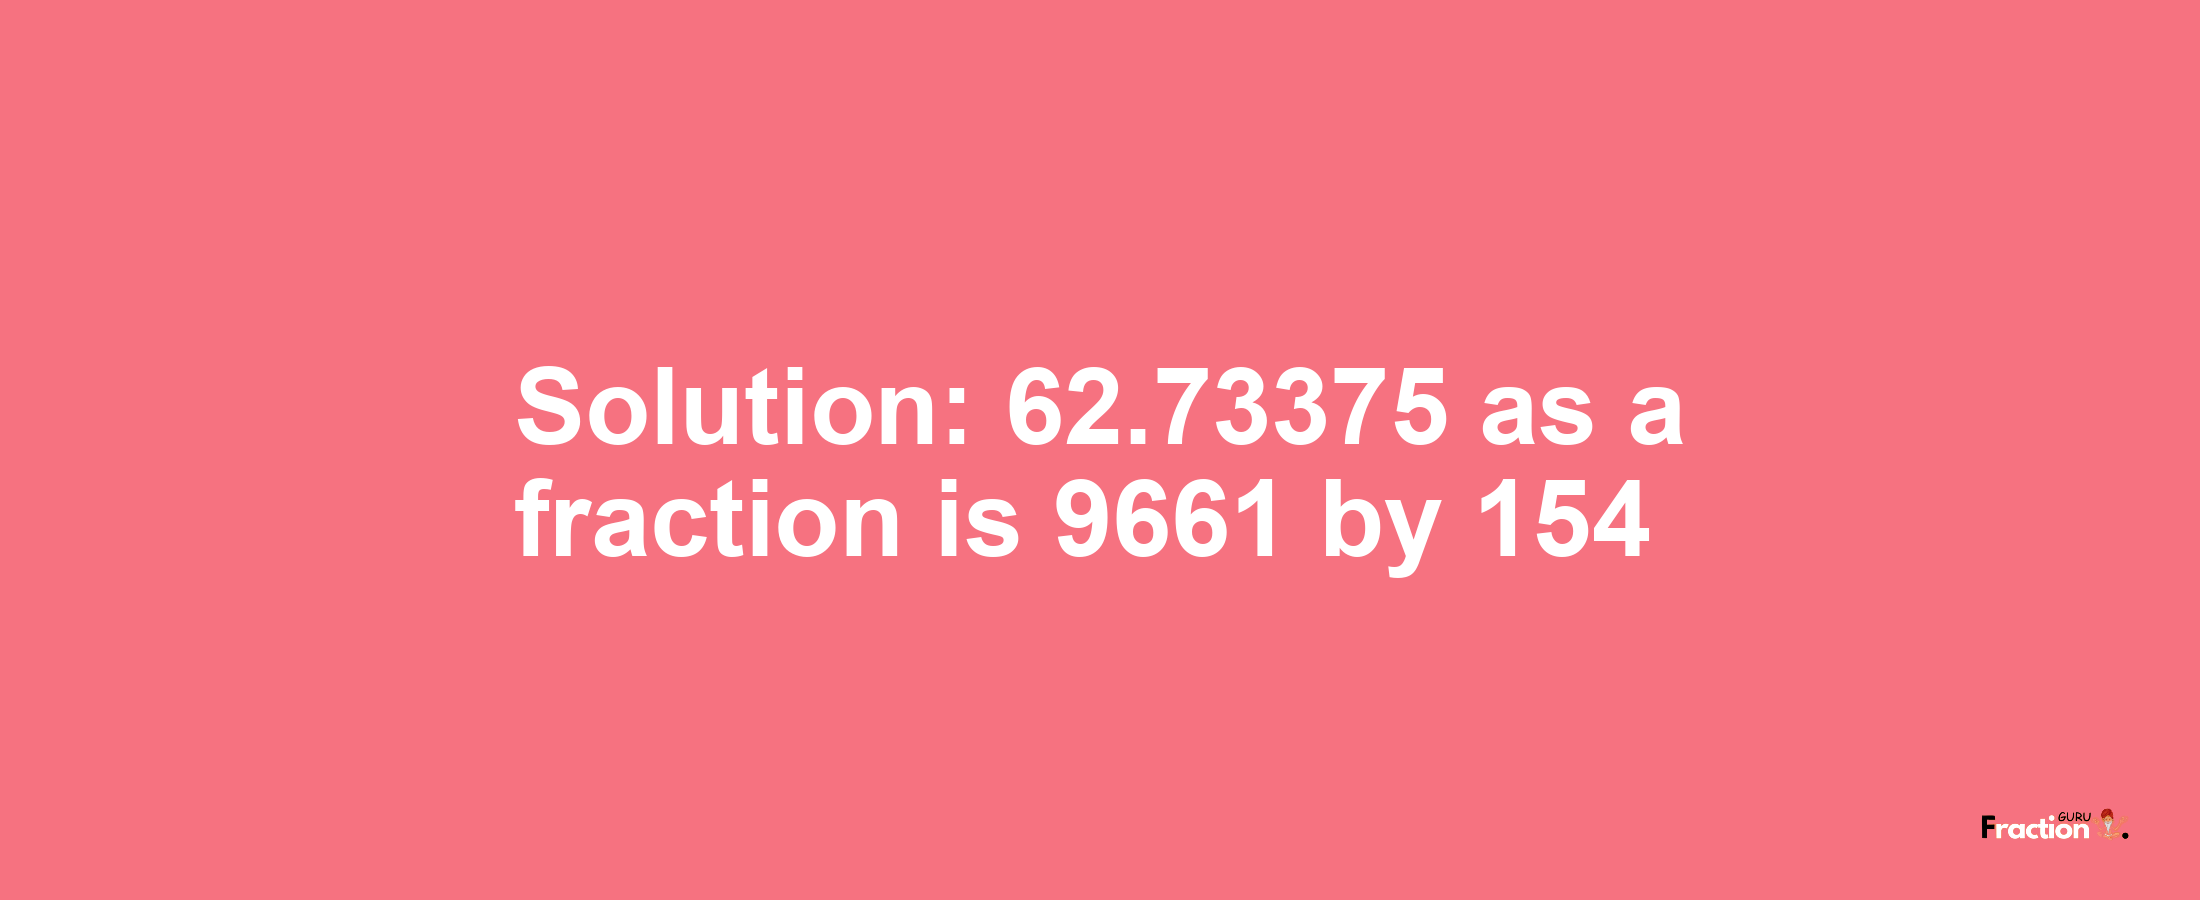 Solution:62.73375 as a fraction is 9661/154